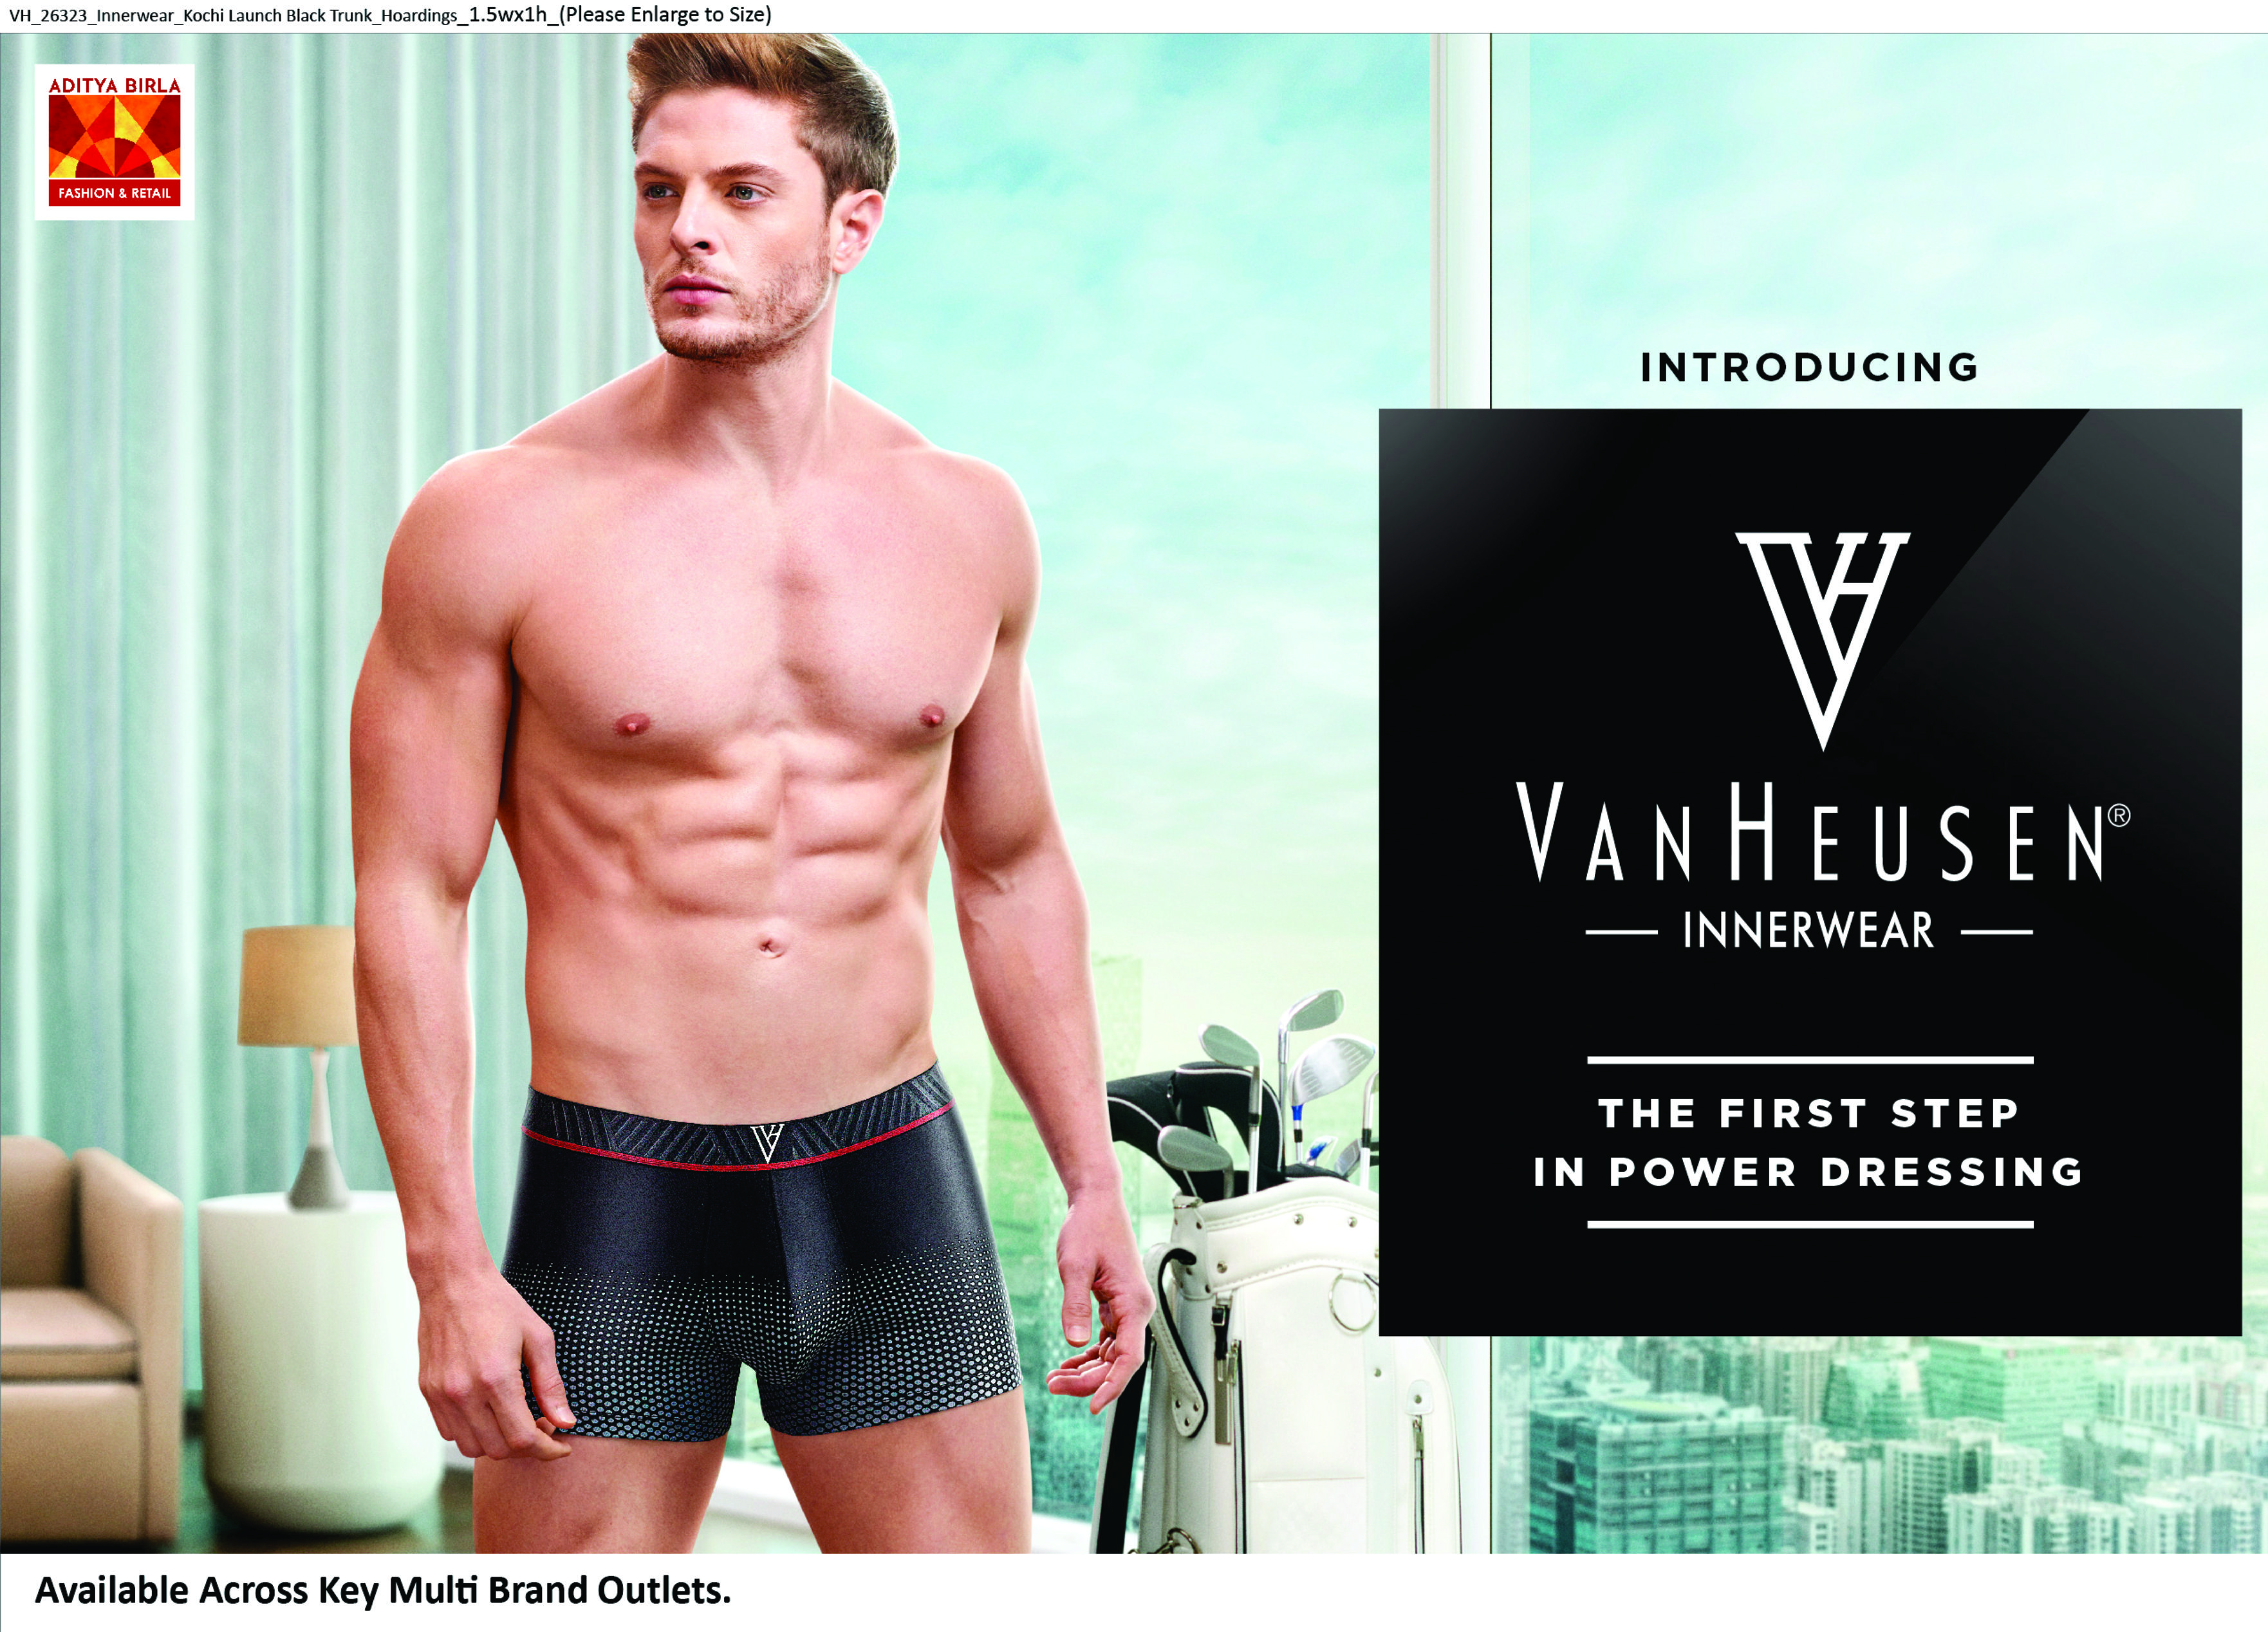 Crafted into fashion Van Heusen offers new lines!